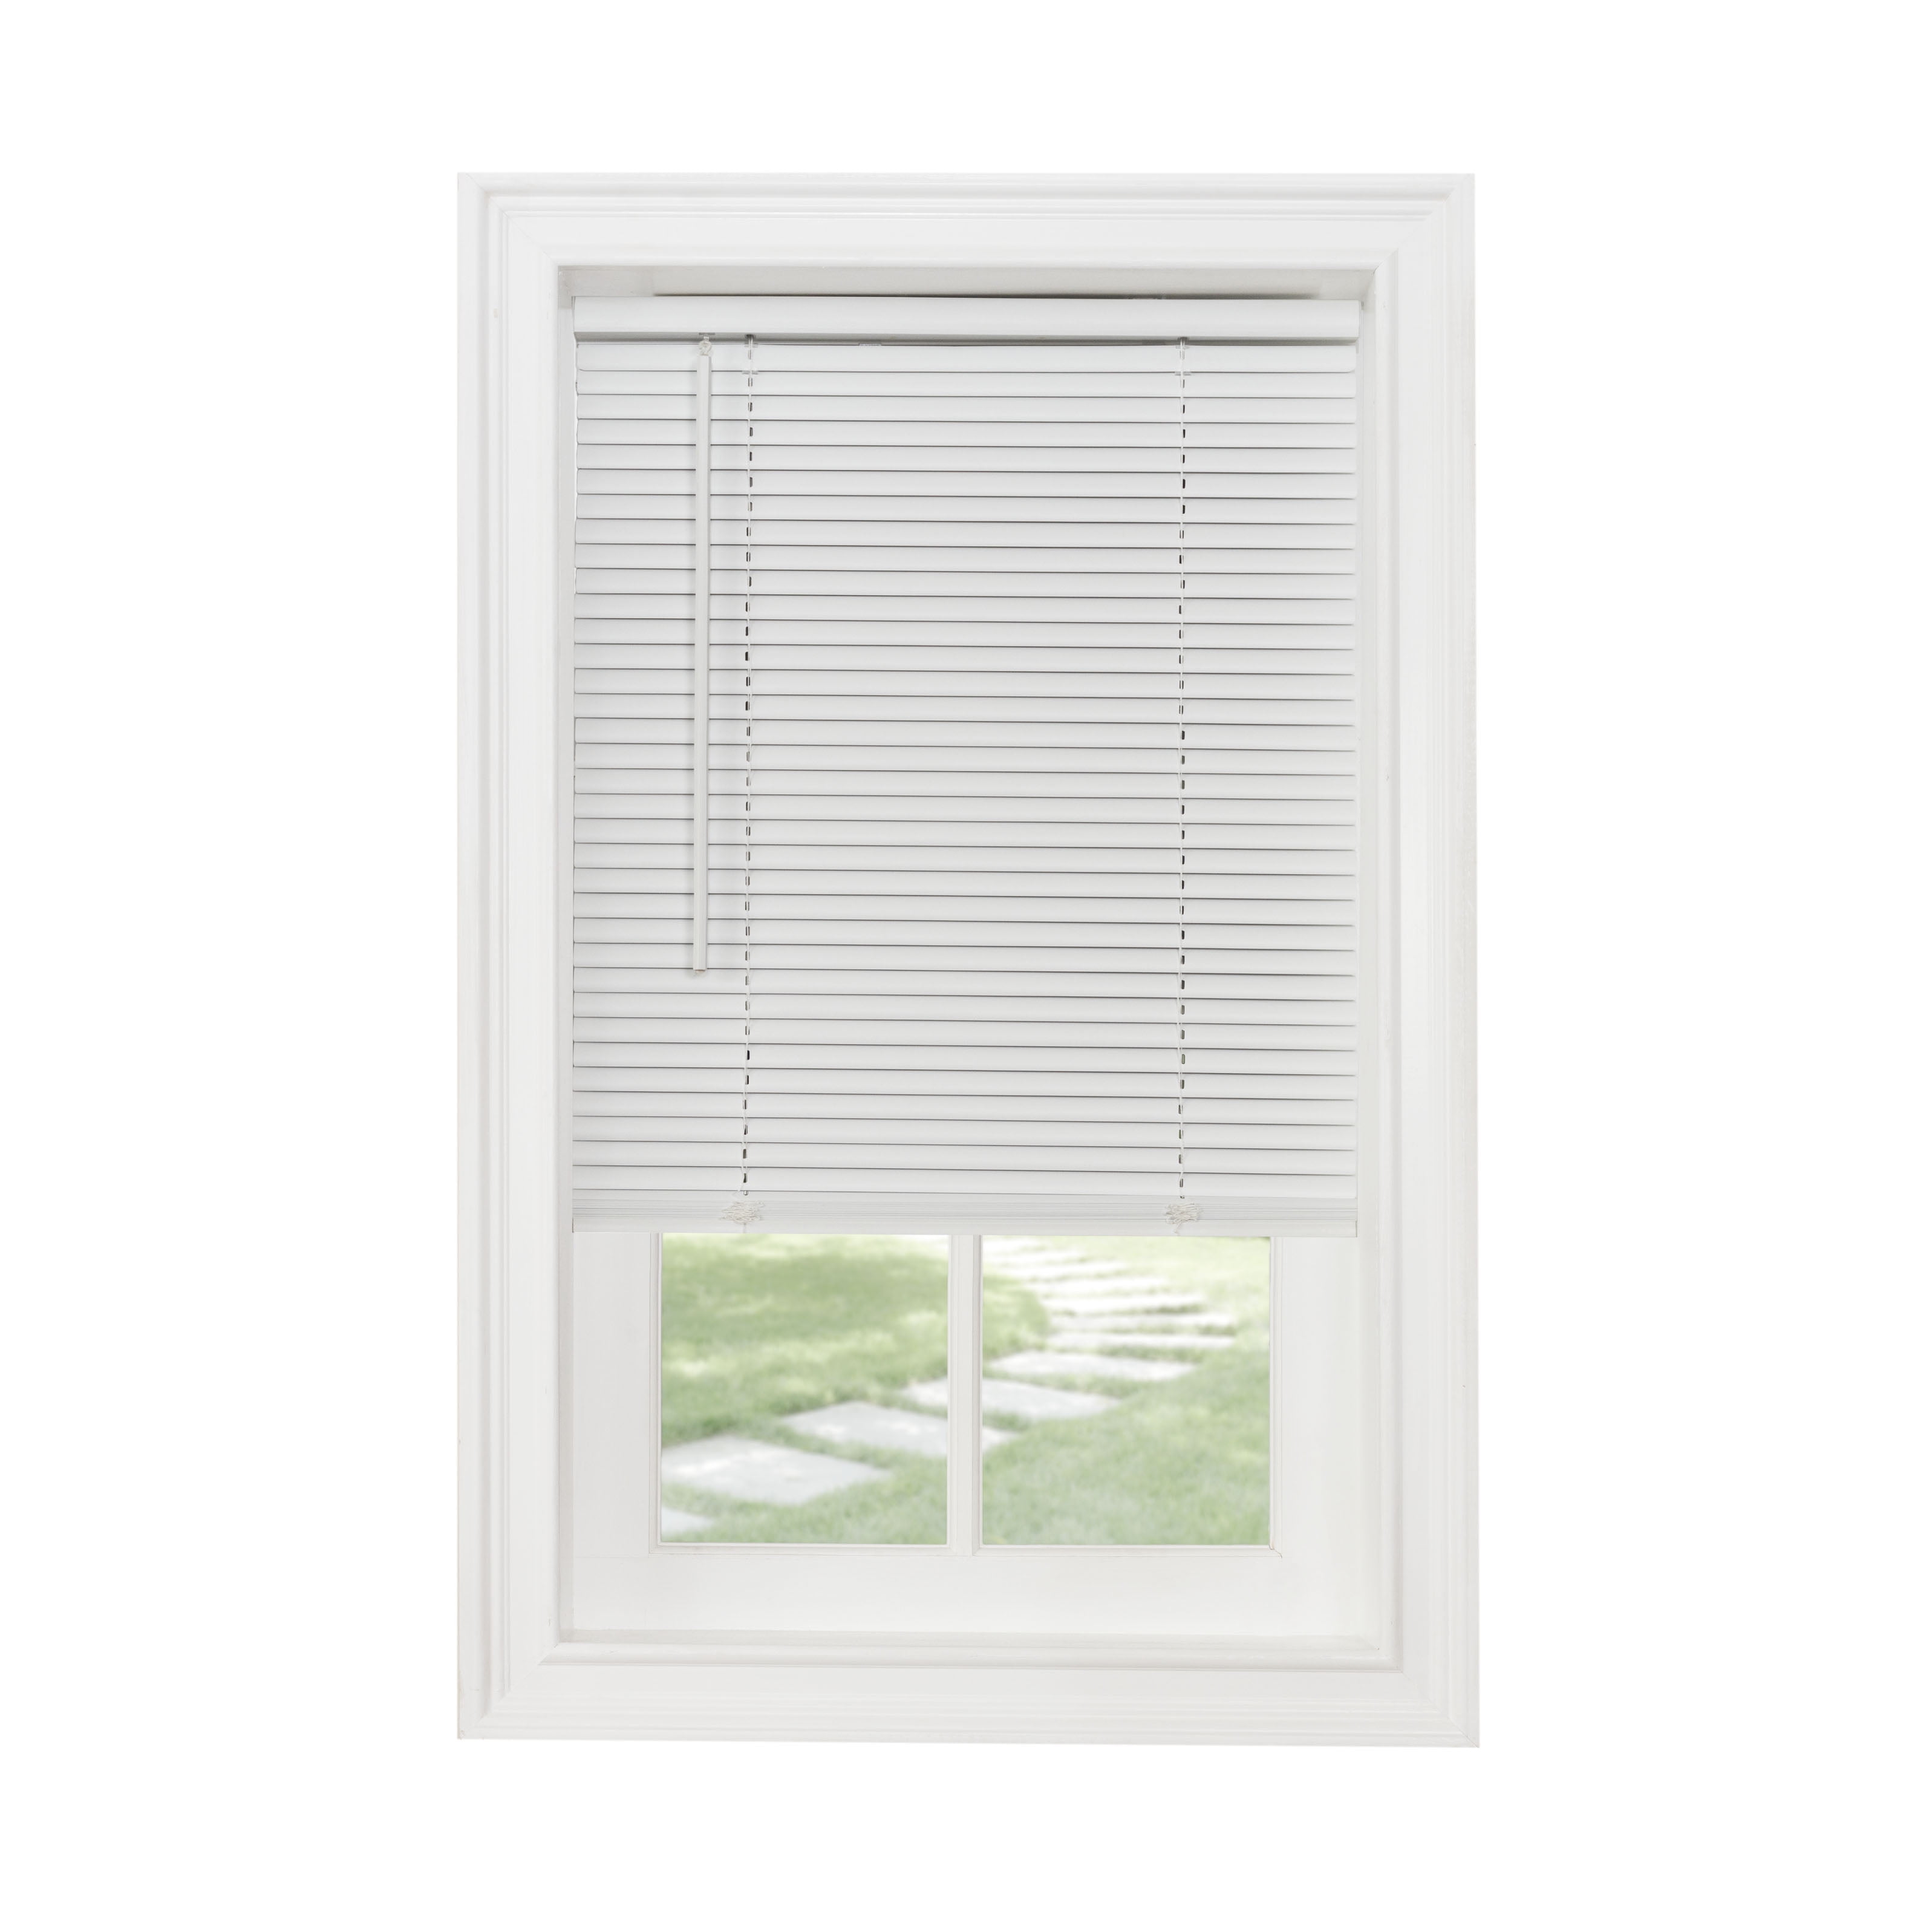 Picture of Achim MSG258WH04 Cordless GII Morningstar 1 in. Light Filtering Mini Blind - 58 x 64 in. - White